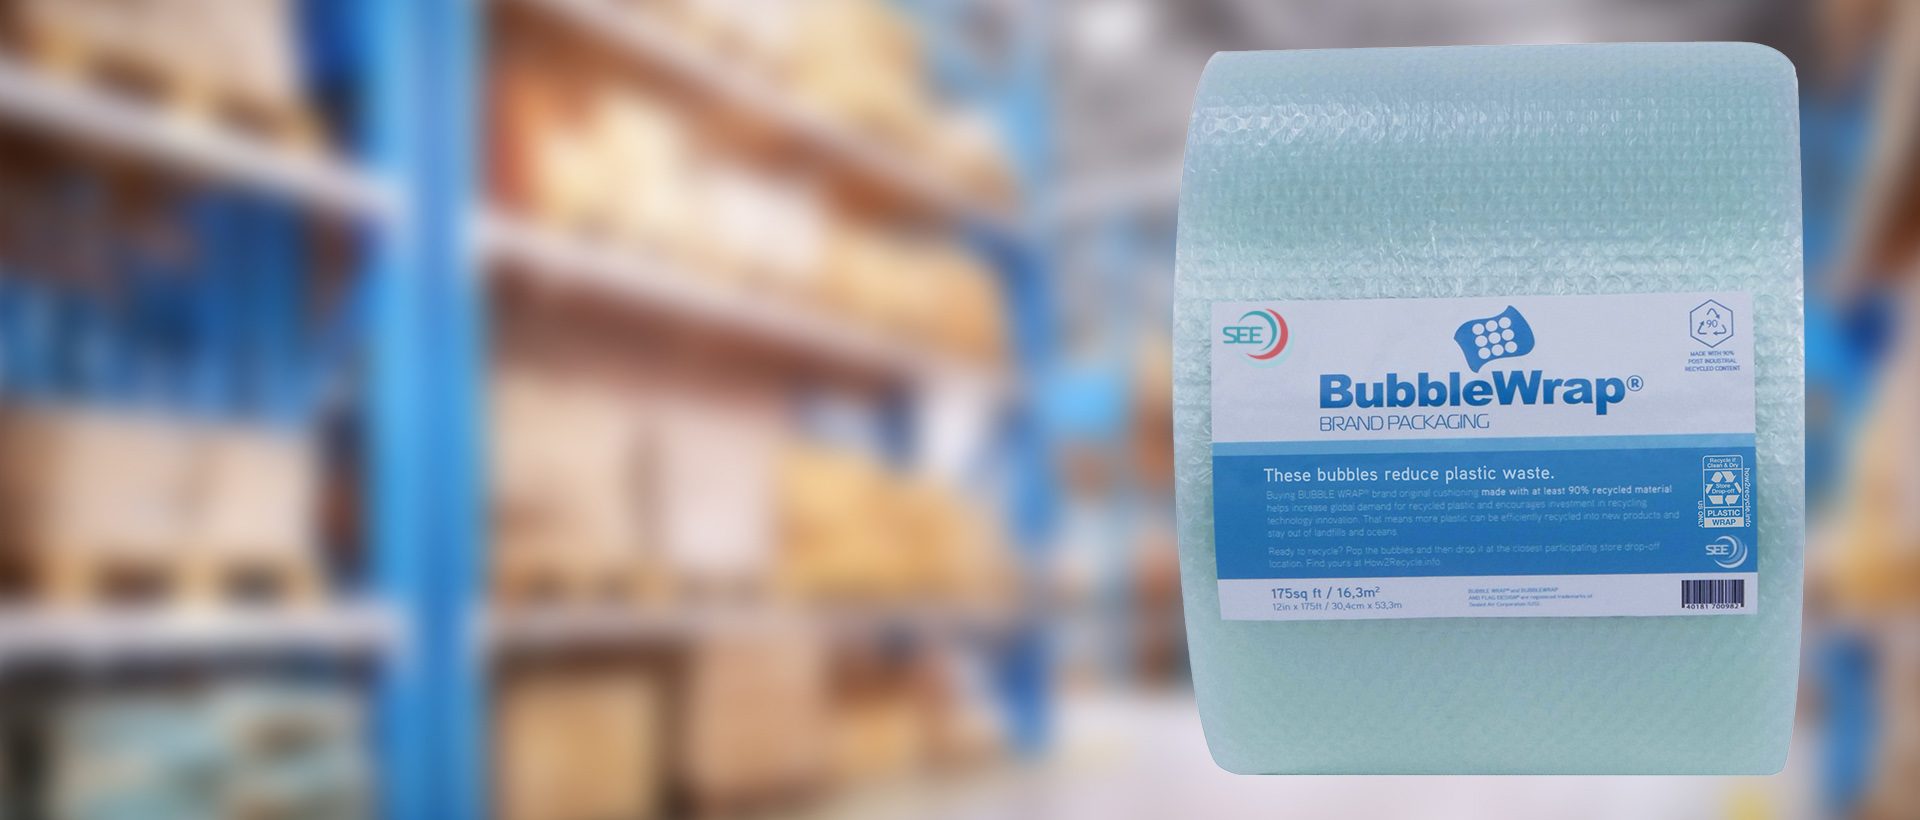 recycled content bubble wrap brand packaging